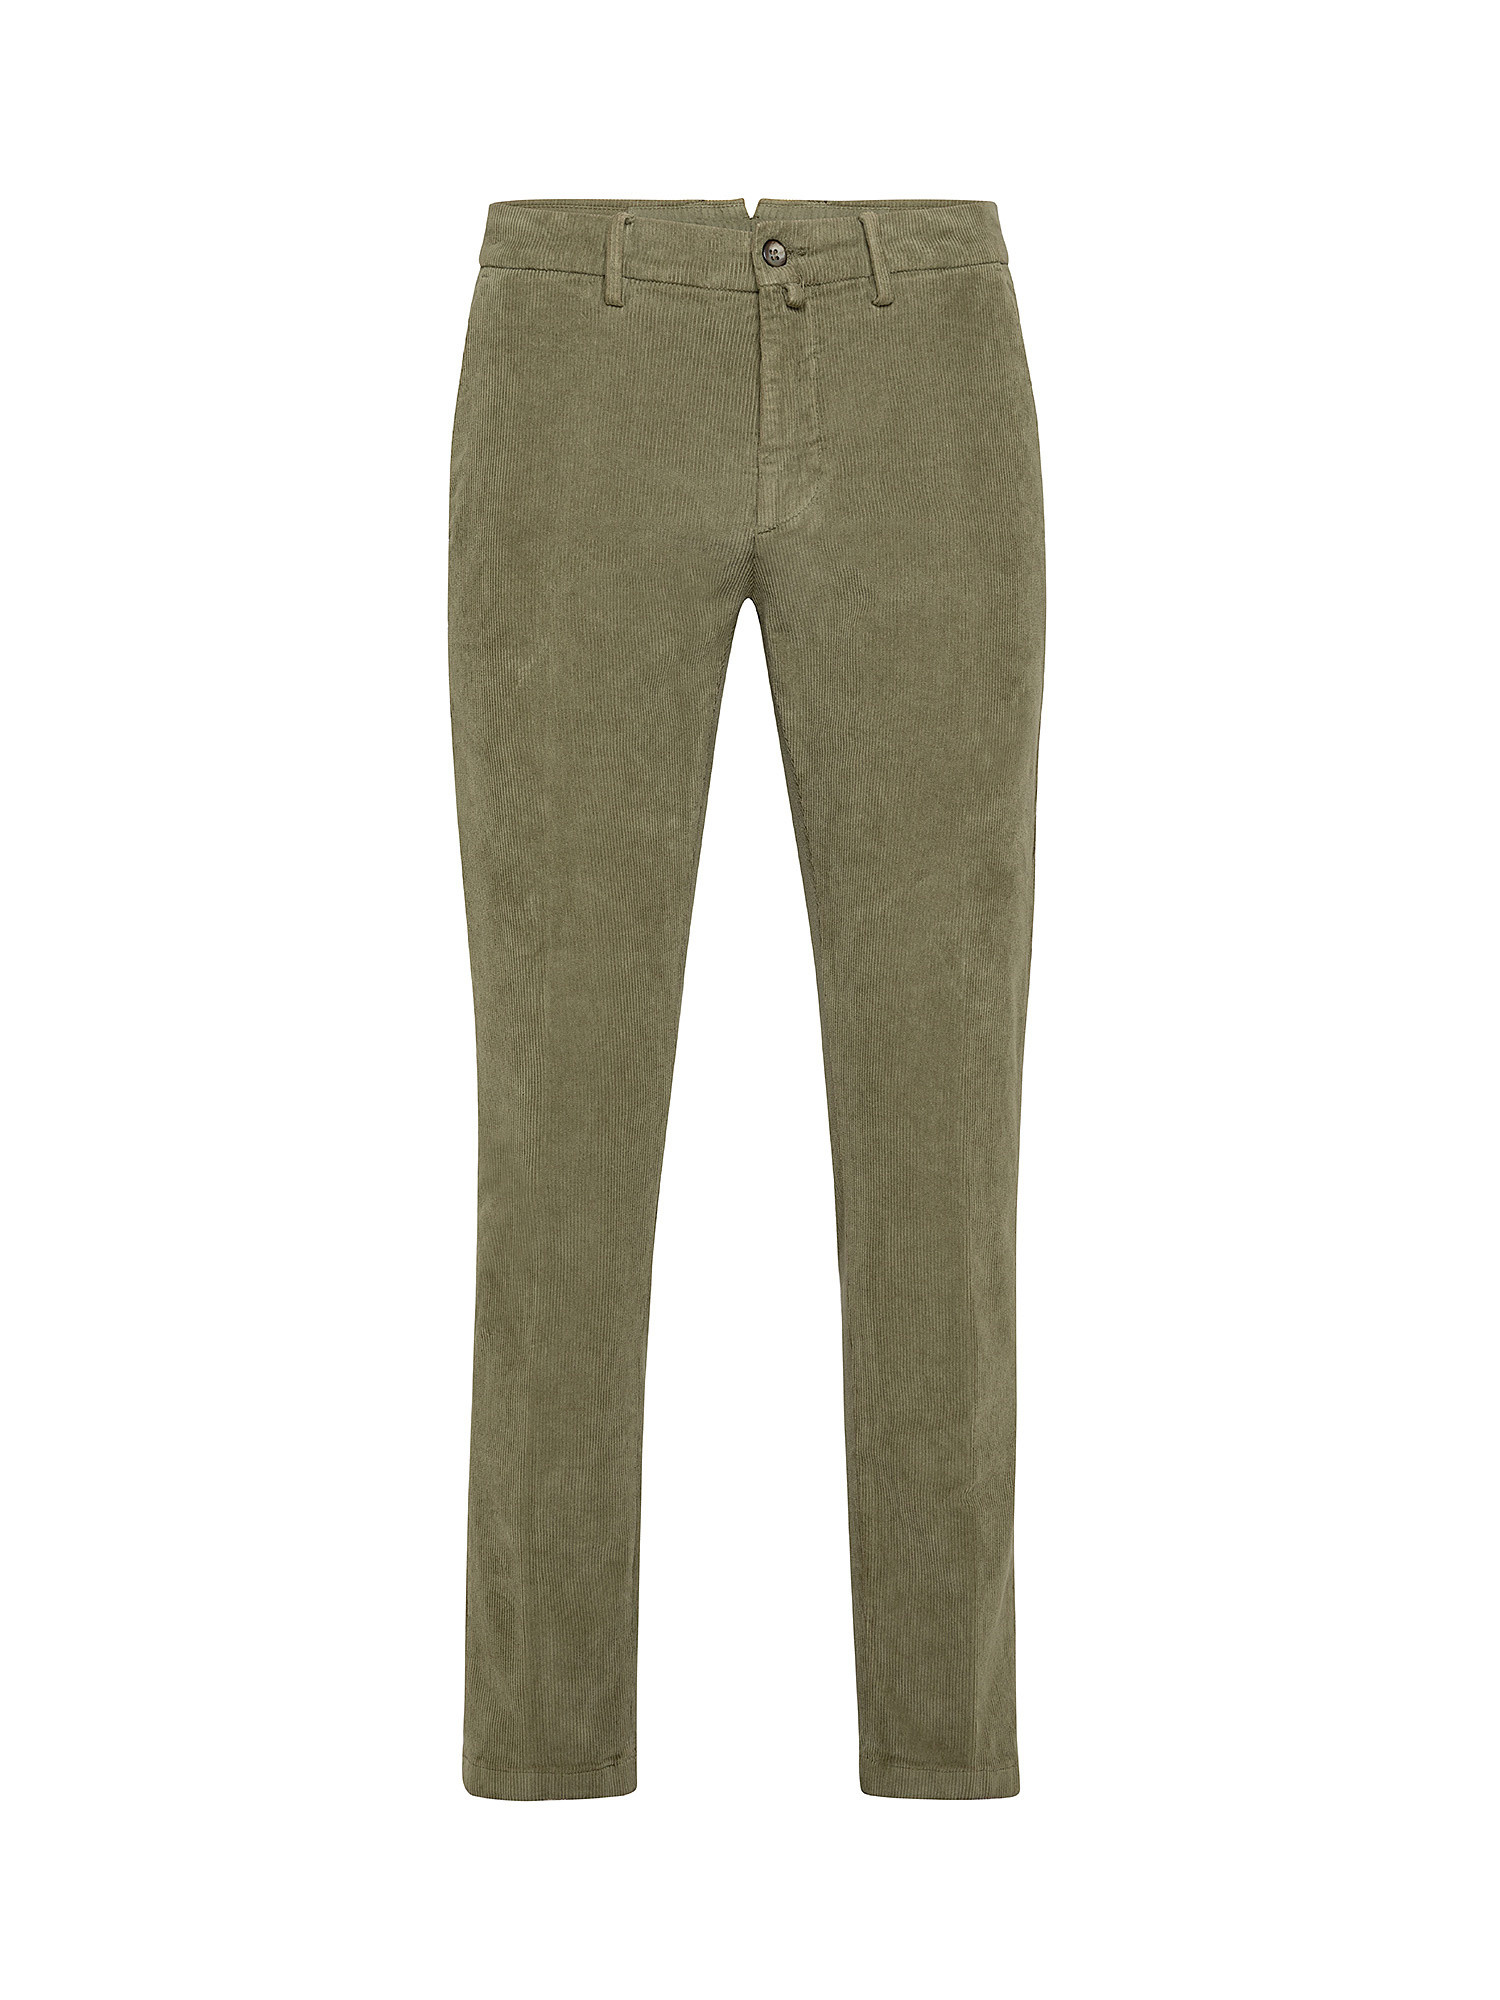 Chino trousers, Green, large image number 0